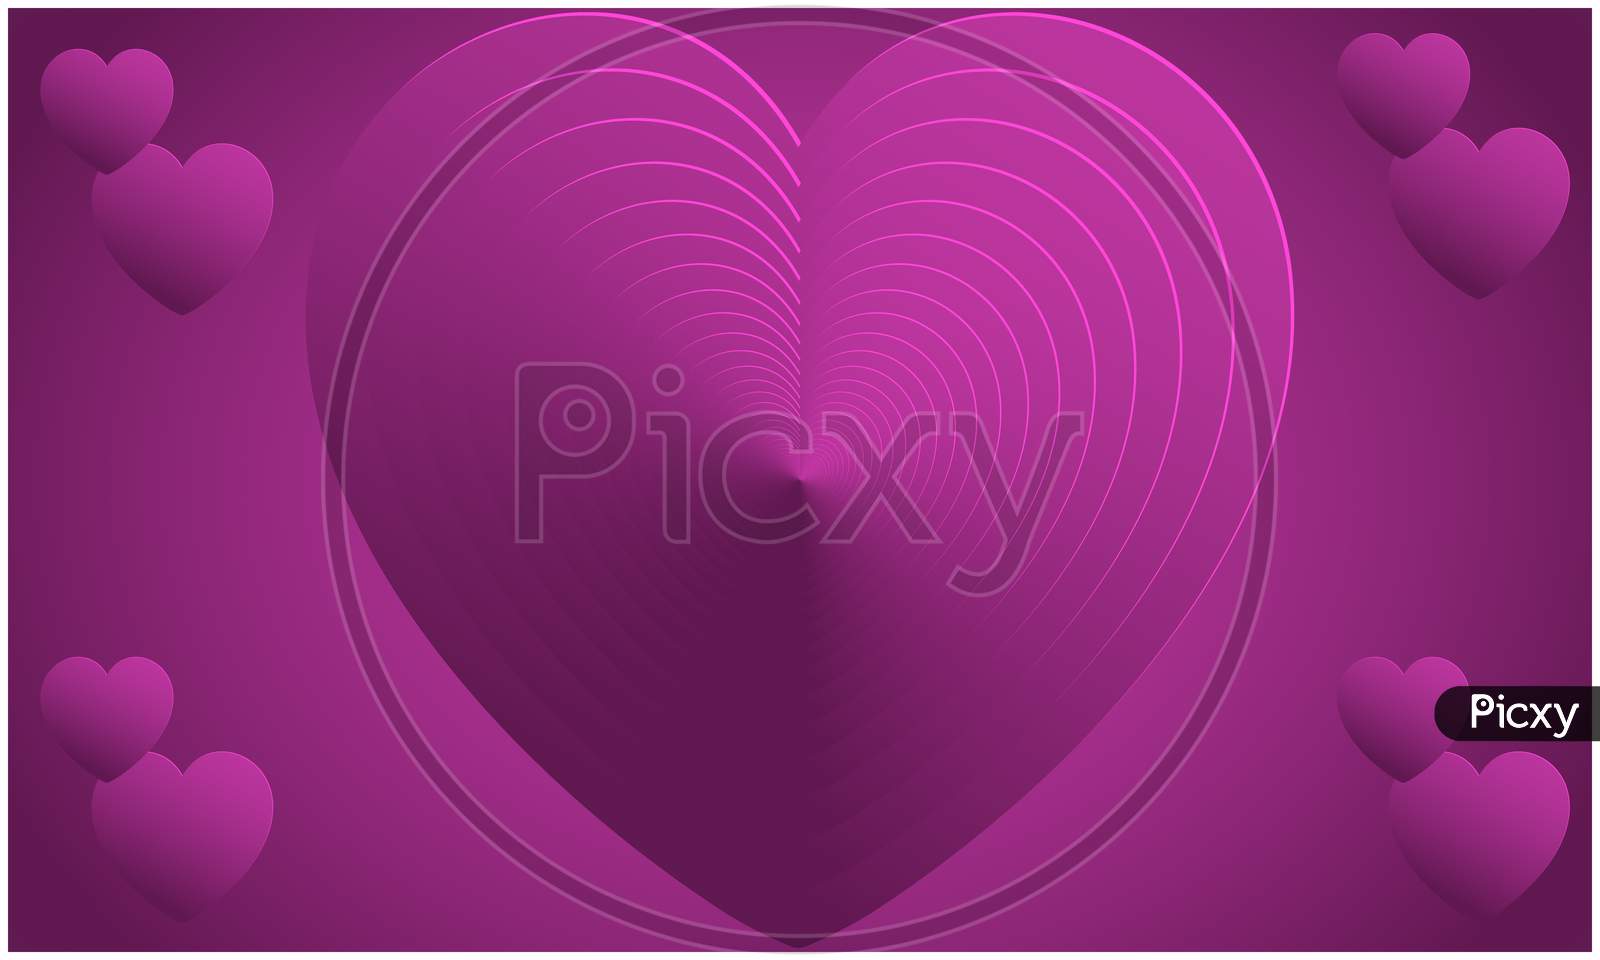 Abstract Design Of Heart On Valentine Background